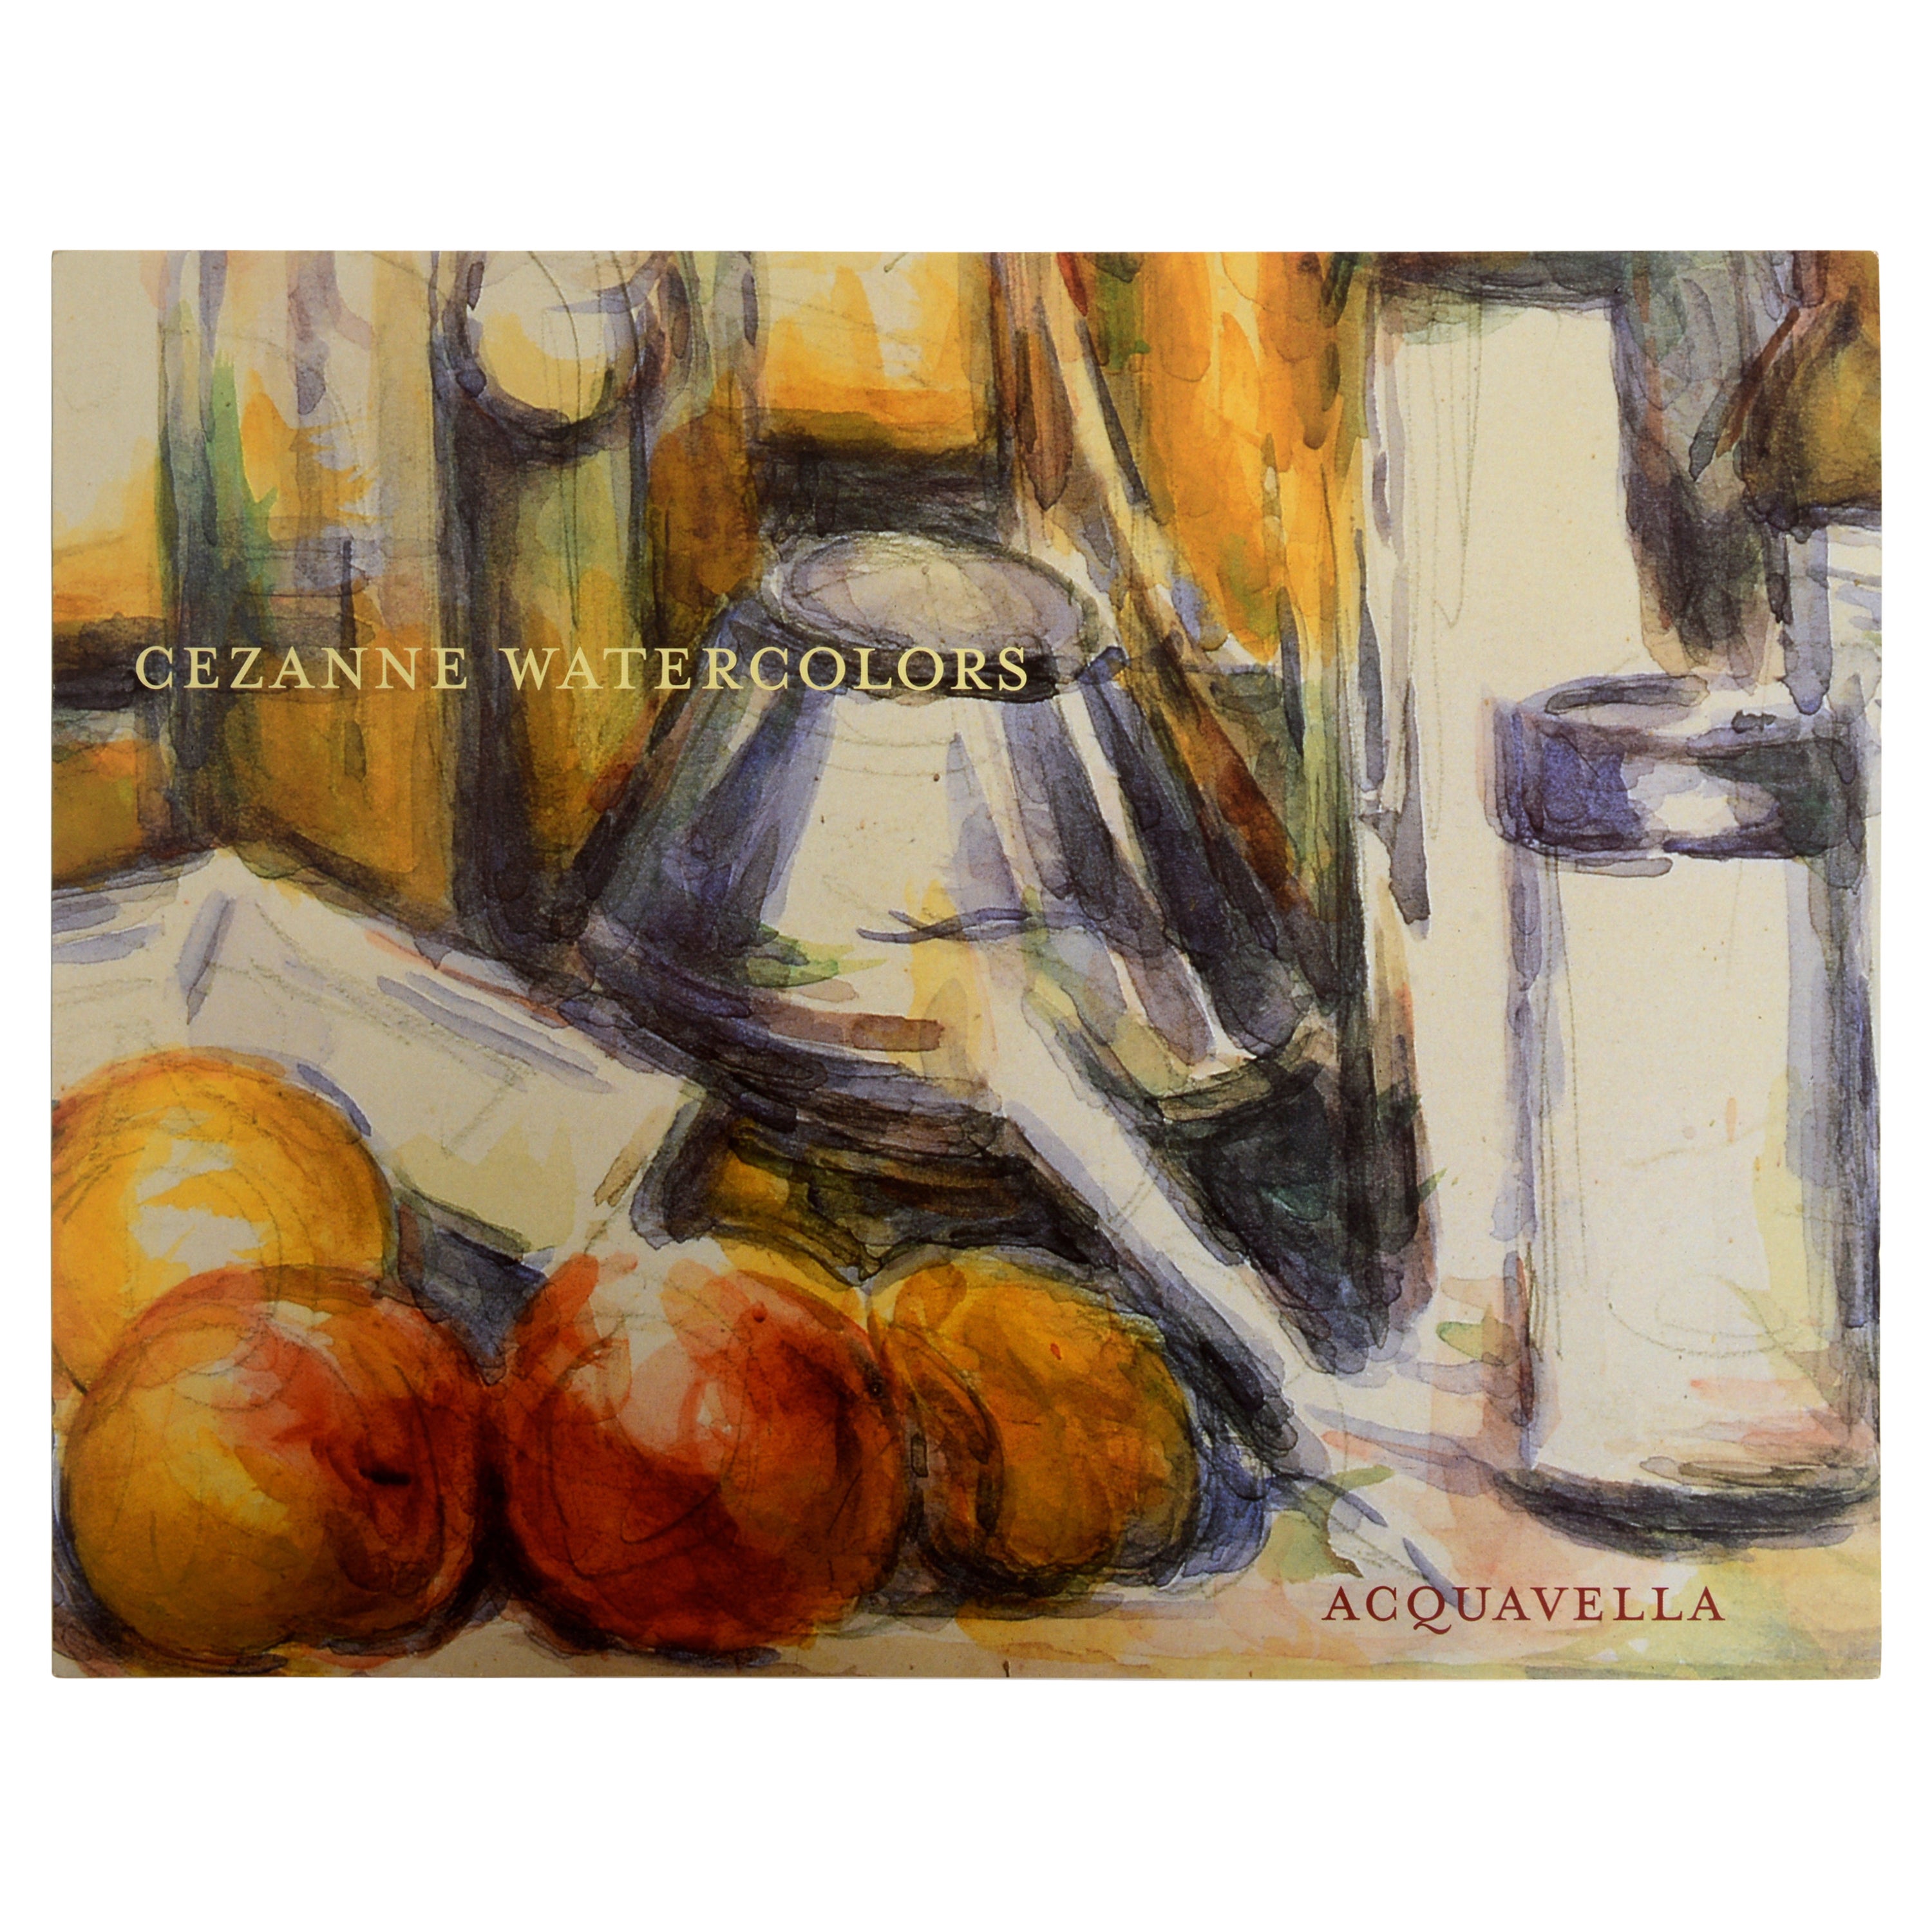 Cézanne Watercolors by Acquavella Galleries, 1st Ed